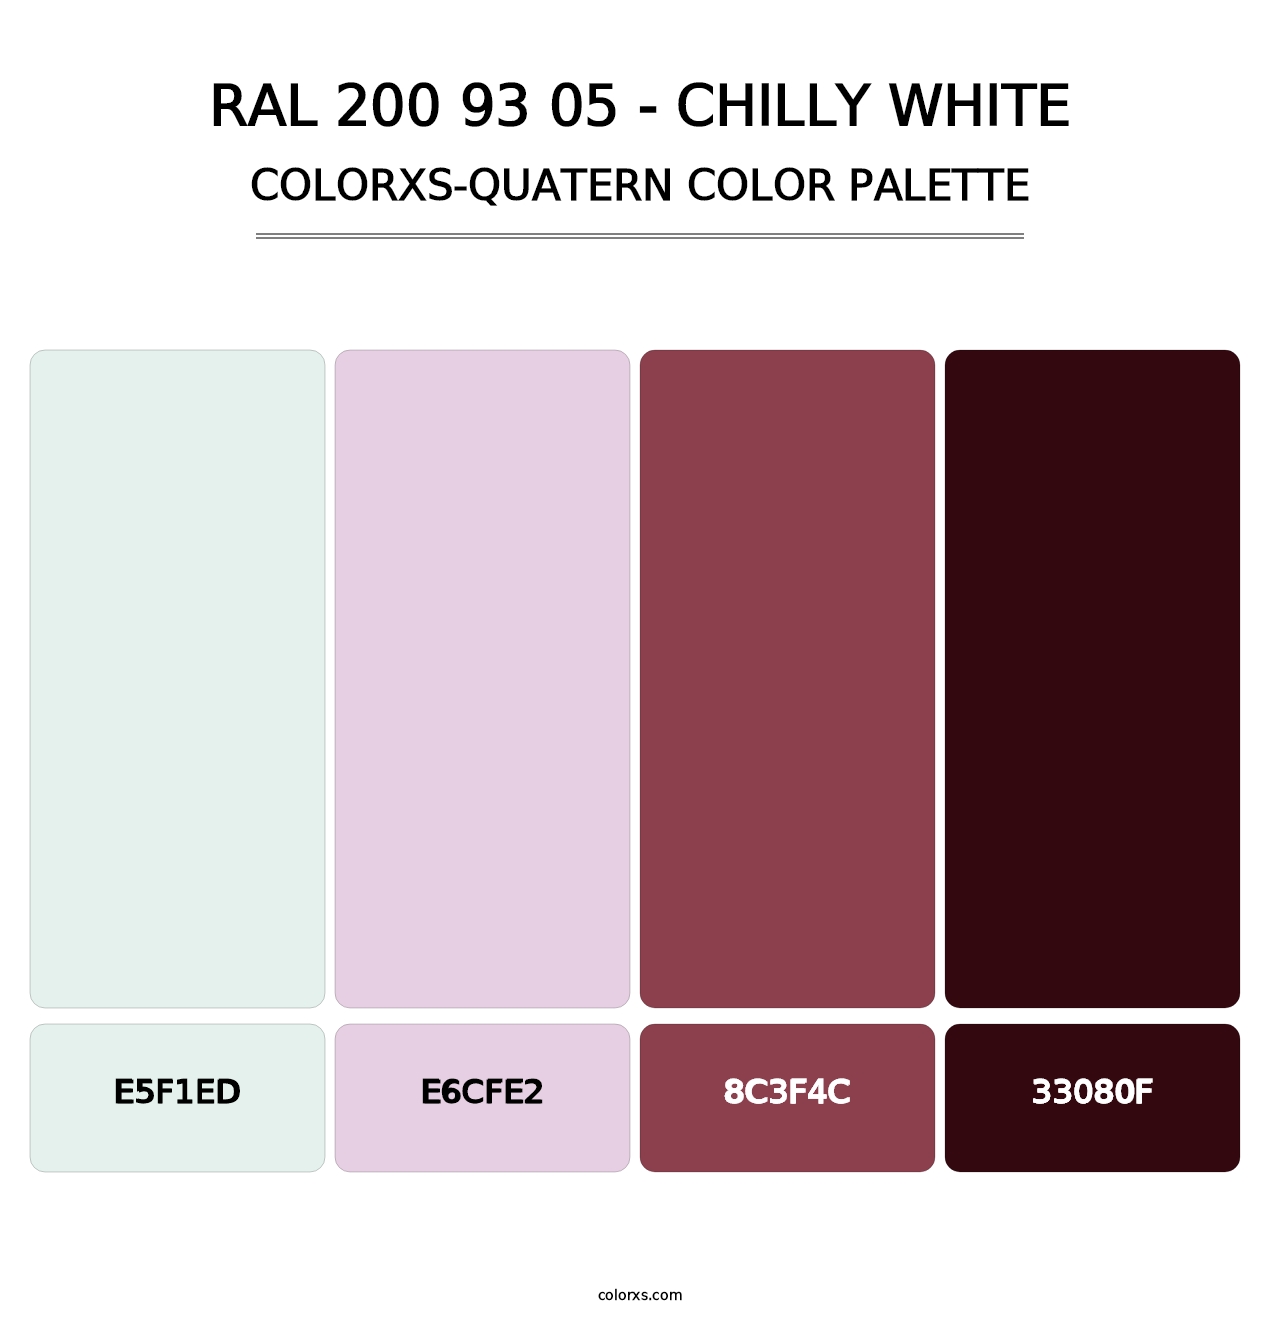 RAL 200 93 05 - Chilly White - Colorxs Quatern Palette